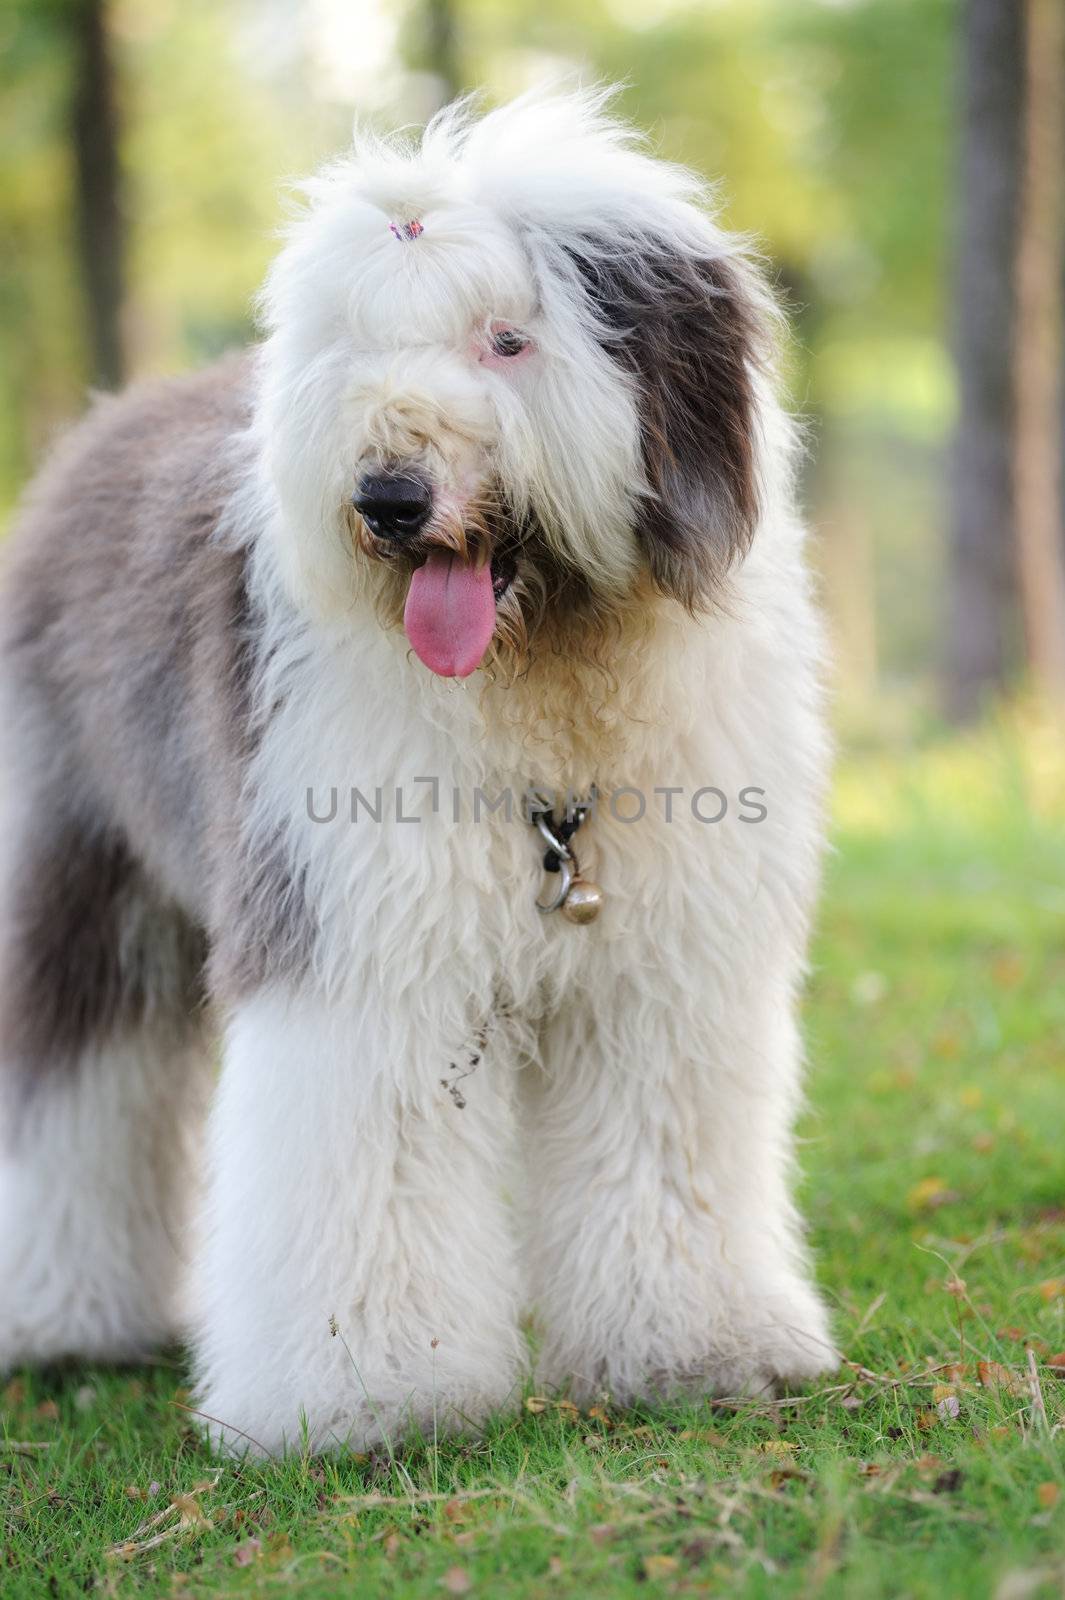 An old English sheepdog standing on the lawn